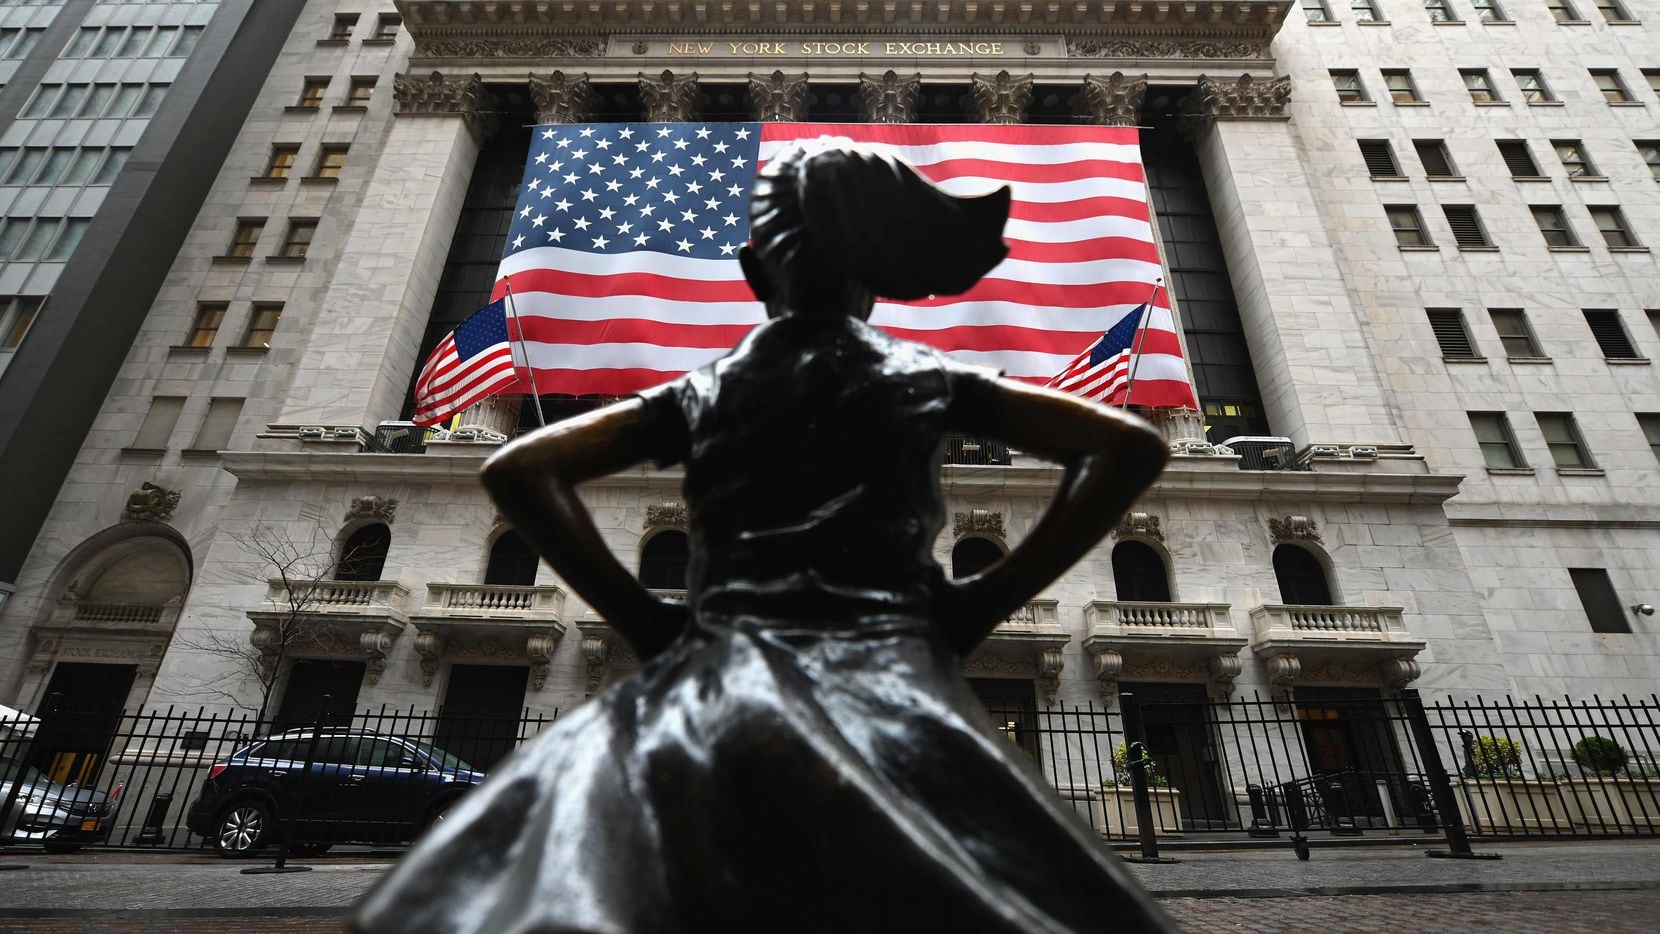 The Fearless Girl statue stands in front of the New York Stock Exchange near Wall Street.